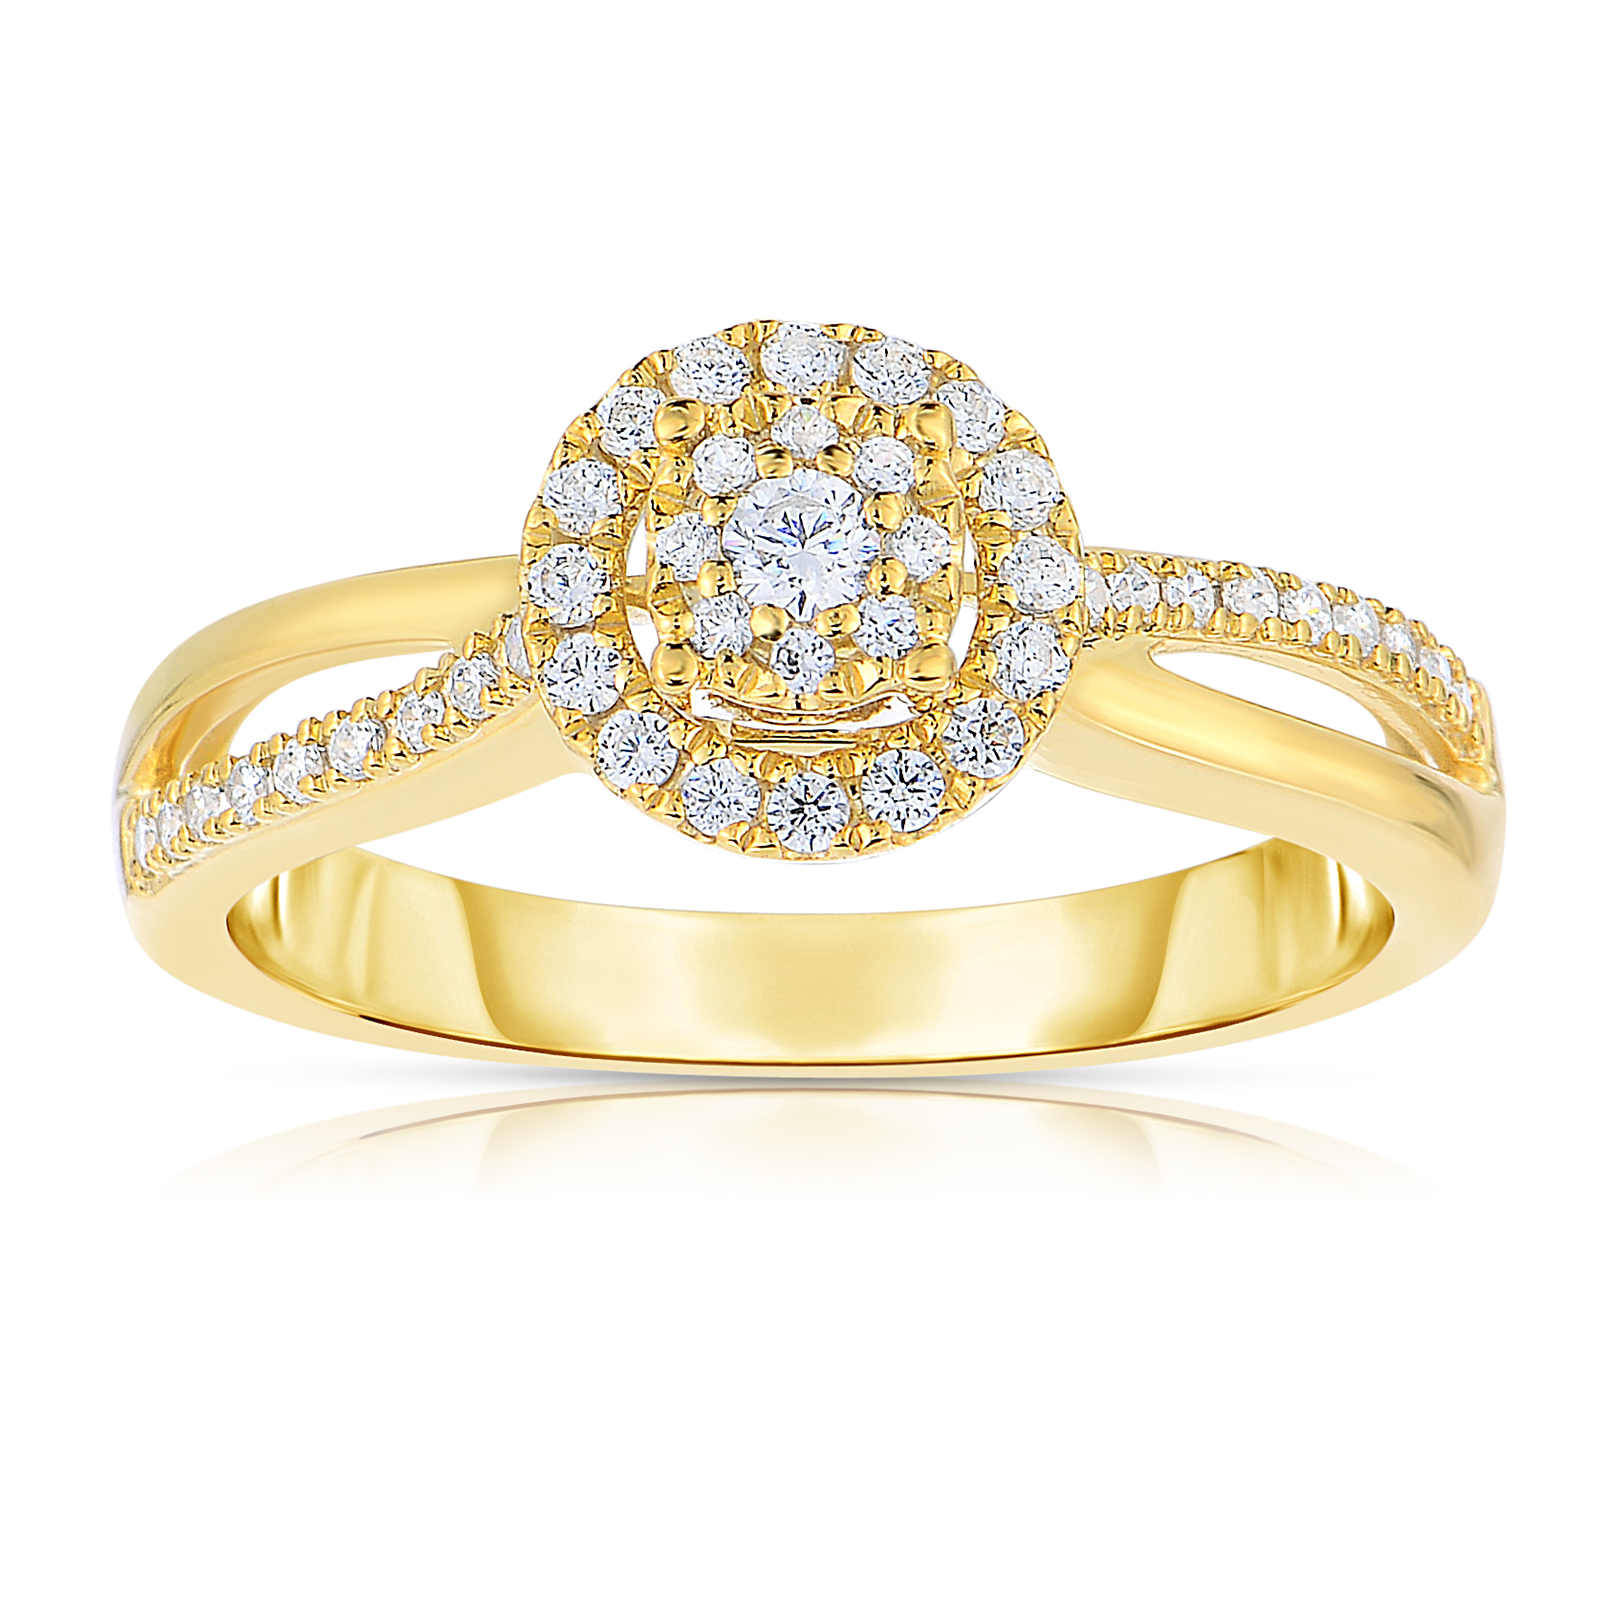 10KY 1/3 CTTW Certified Diamond Round Ring